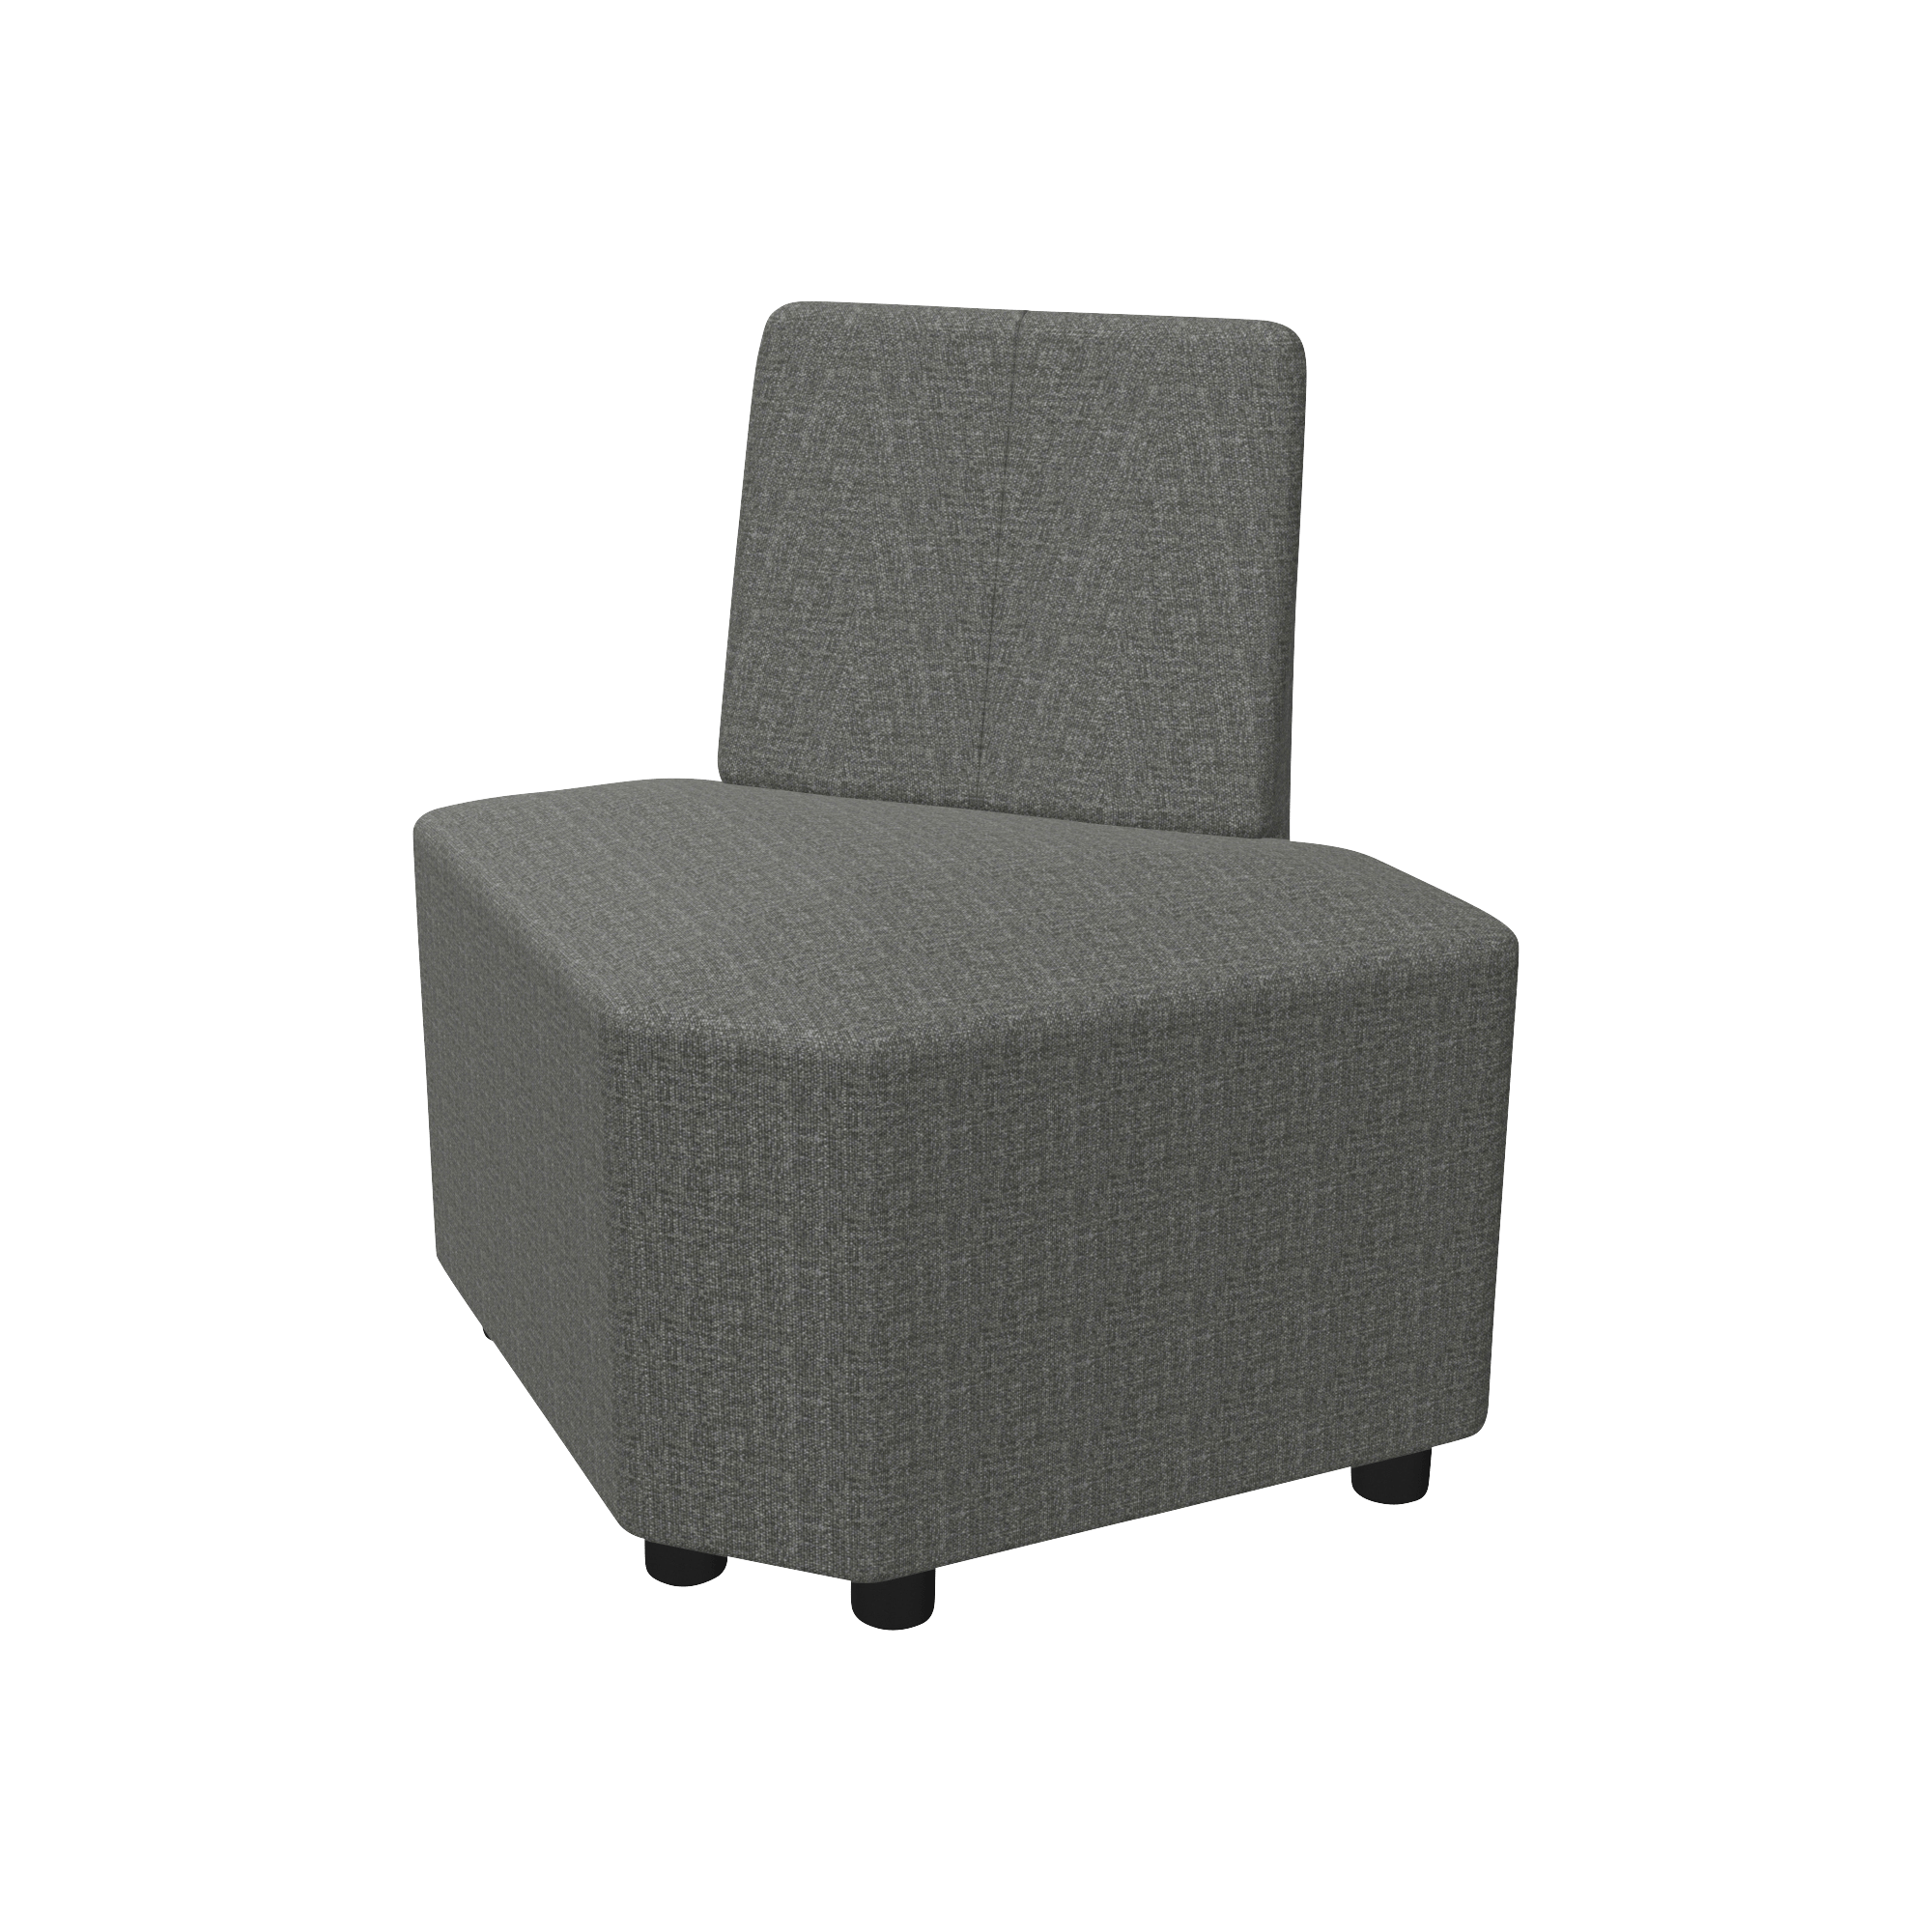 triangular shaped chair on casters with back rest